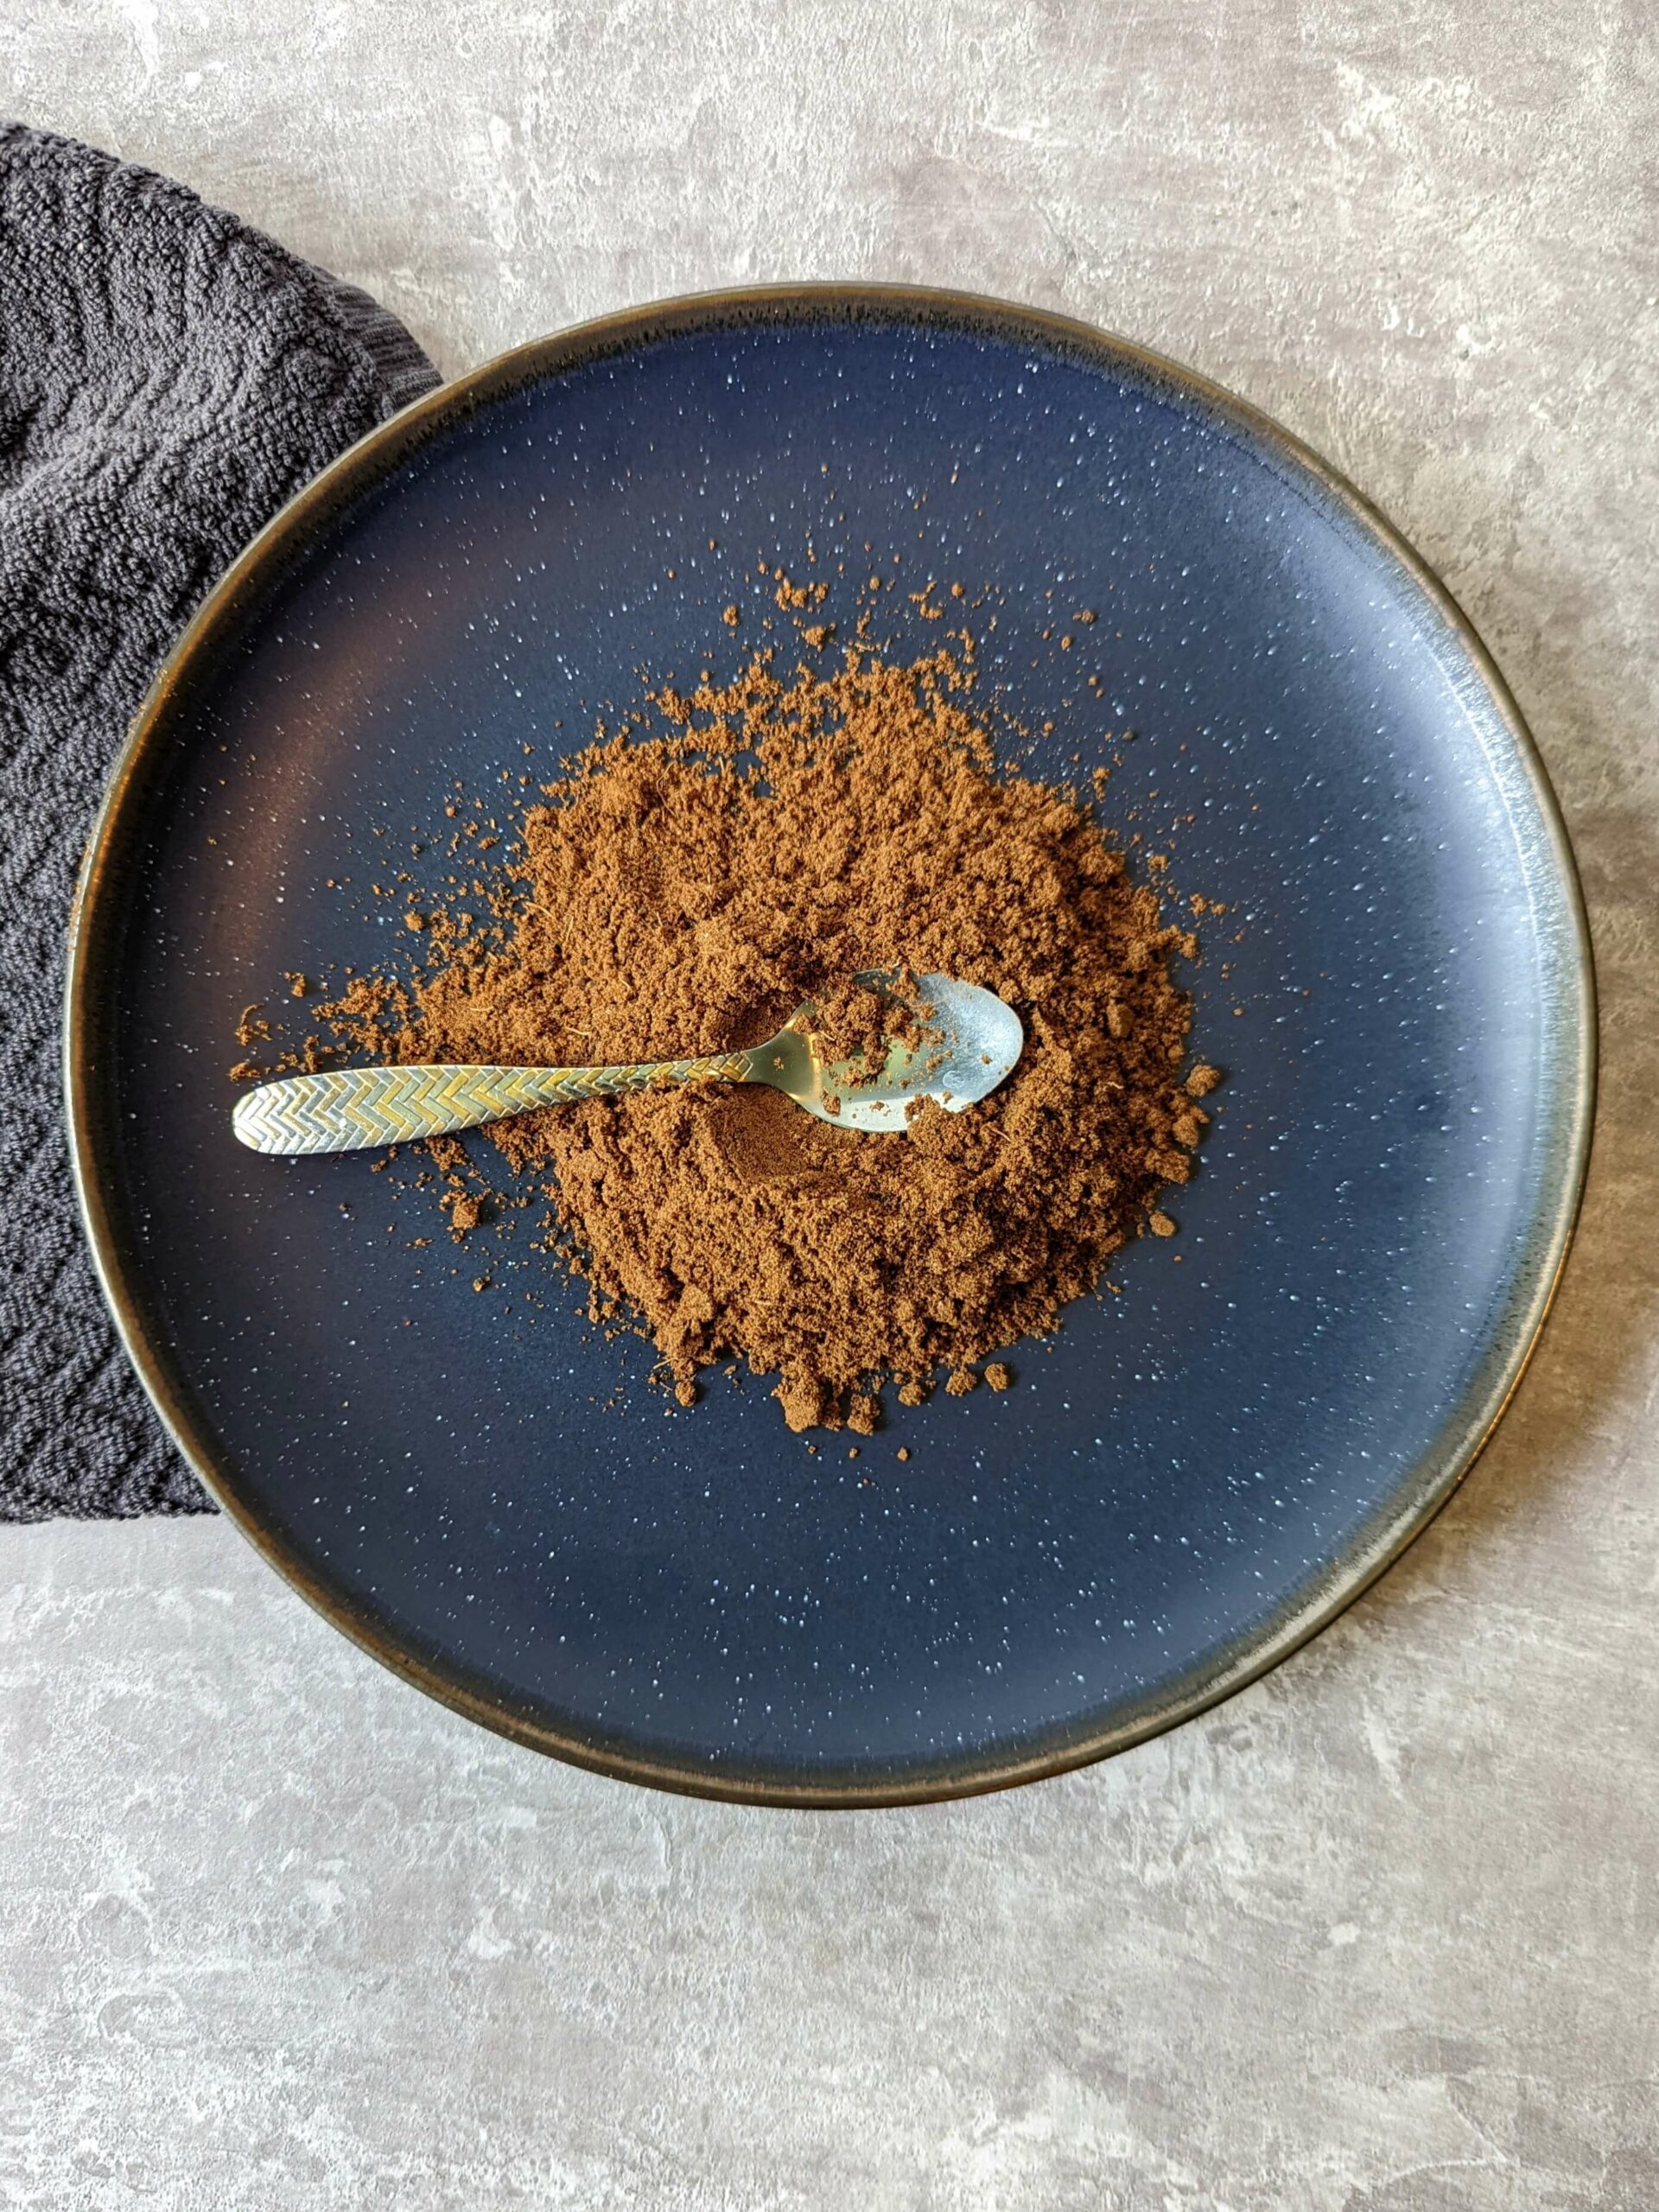 Our garam masala recipe on a plate for display.